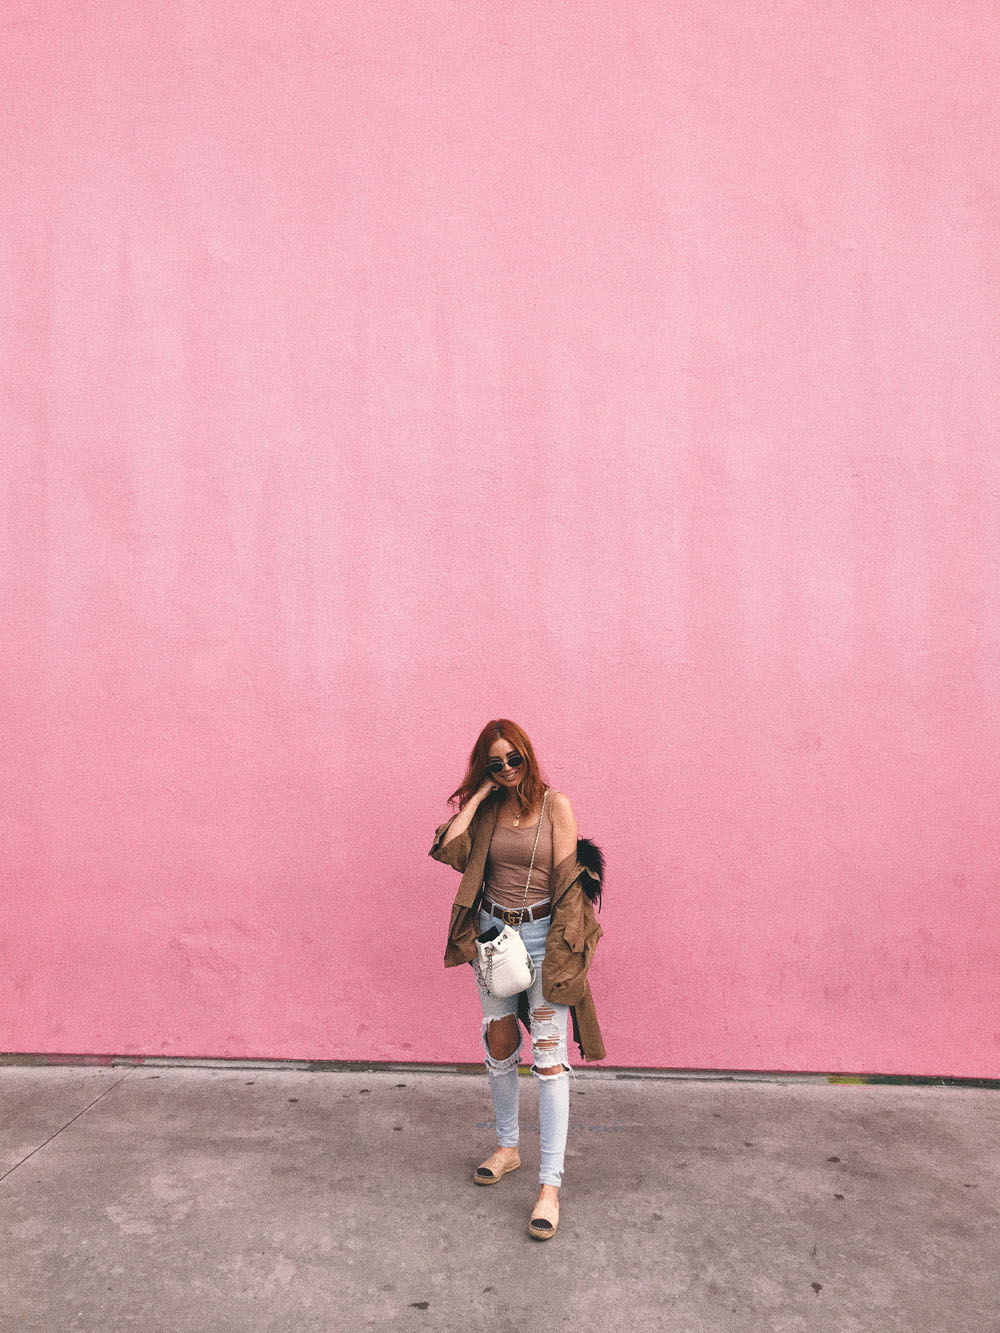 Beverly Hills Hotel Yvette King Pink Wall